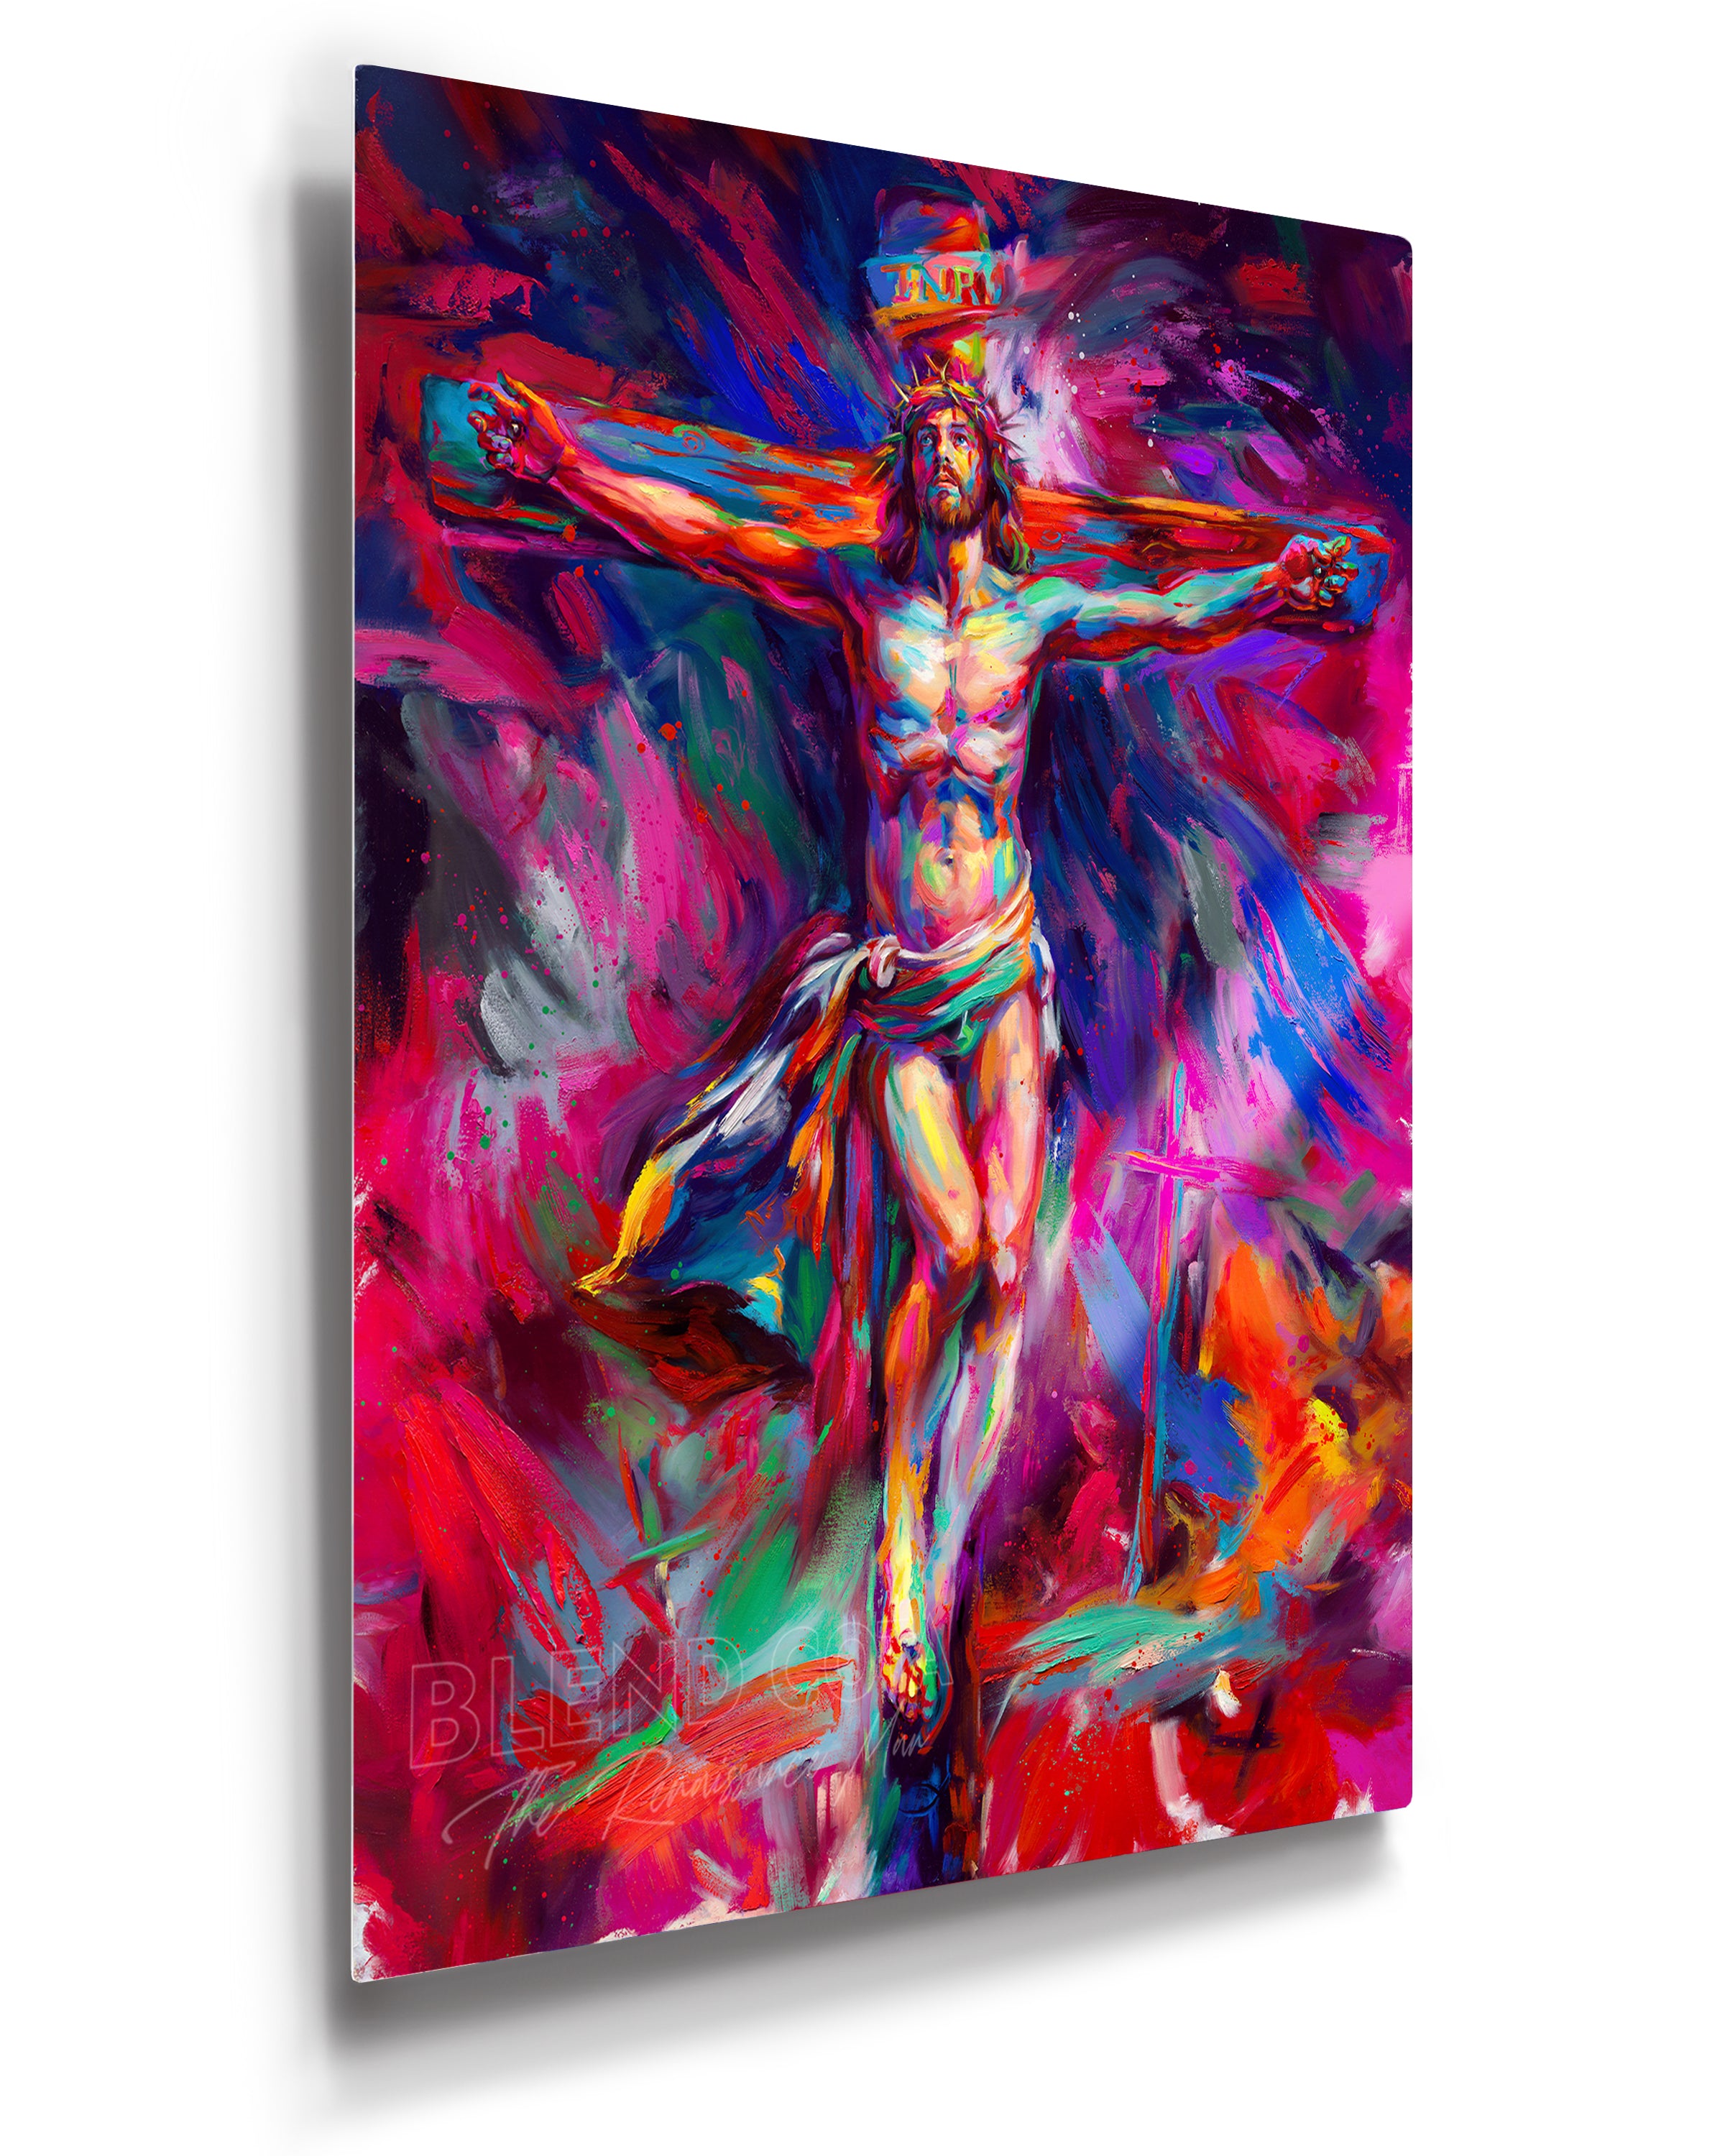 For The Love of God | Jesus Crucifixion - Blend Cota Limited Edition Art on Metal - Blend Cota Studios 